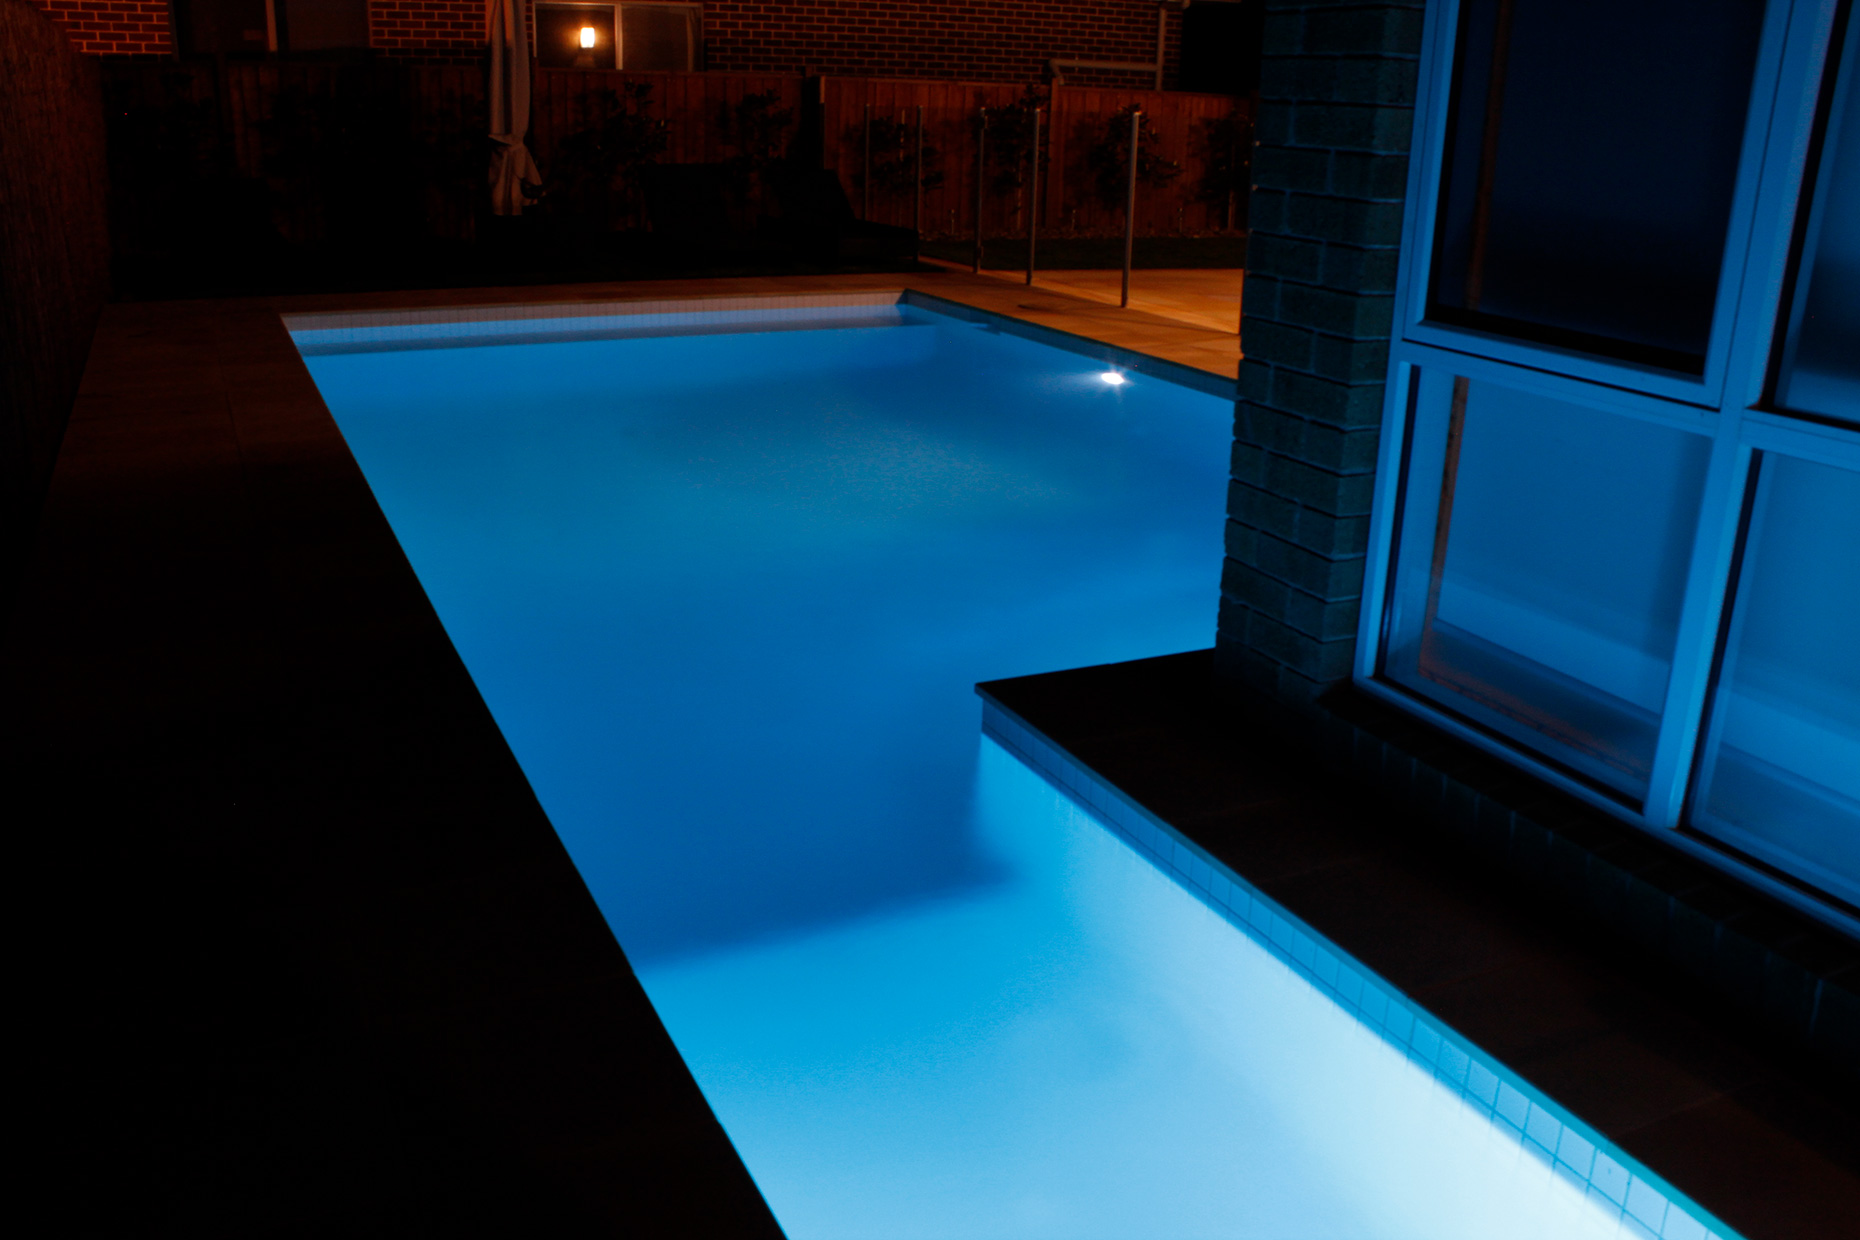 Venetian Pools Concrete In-ground Swimming Pool & Spa Design and Construction in Melbourne